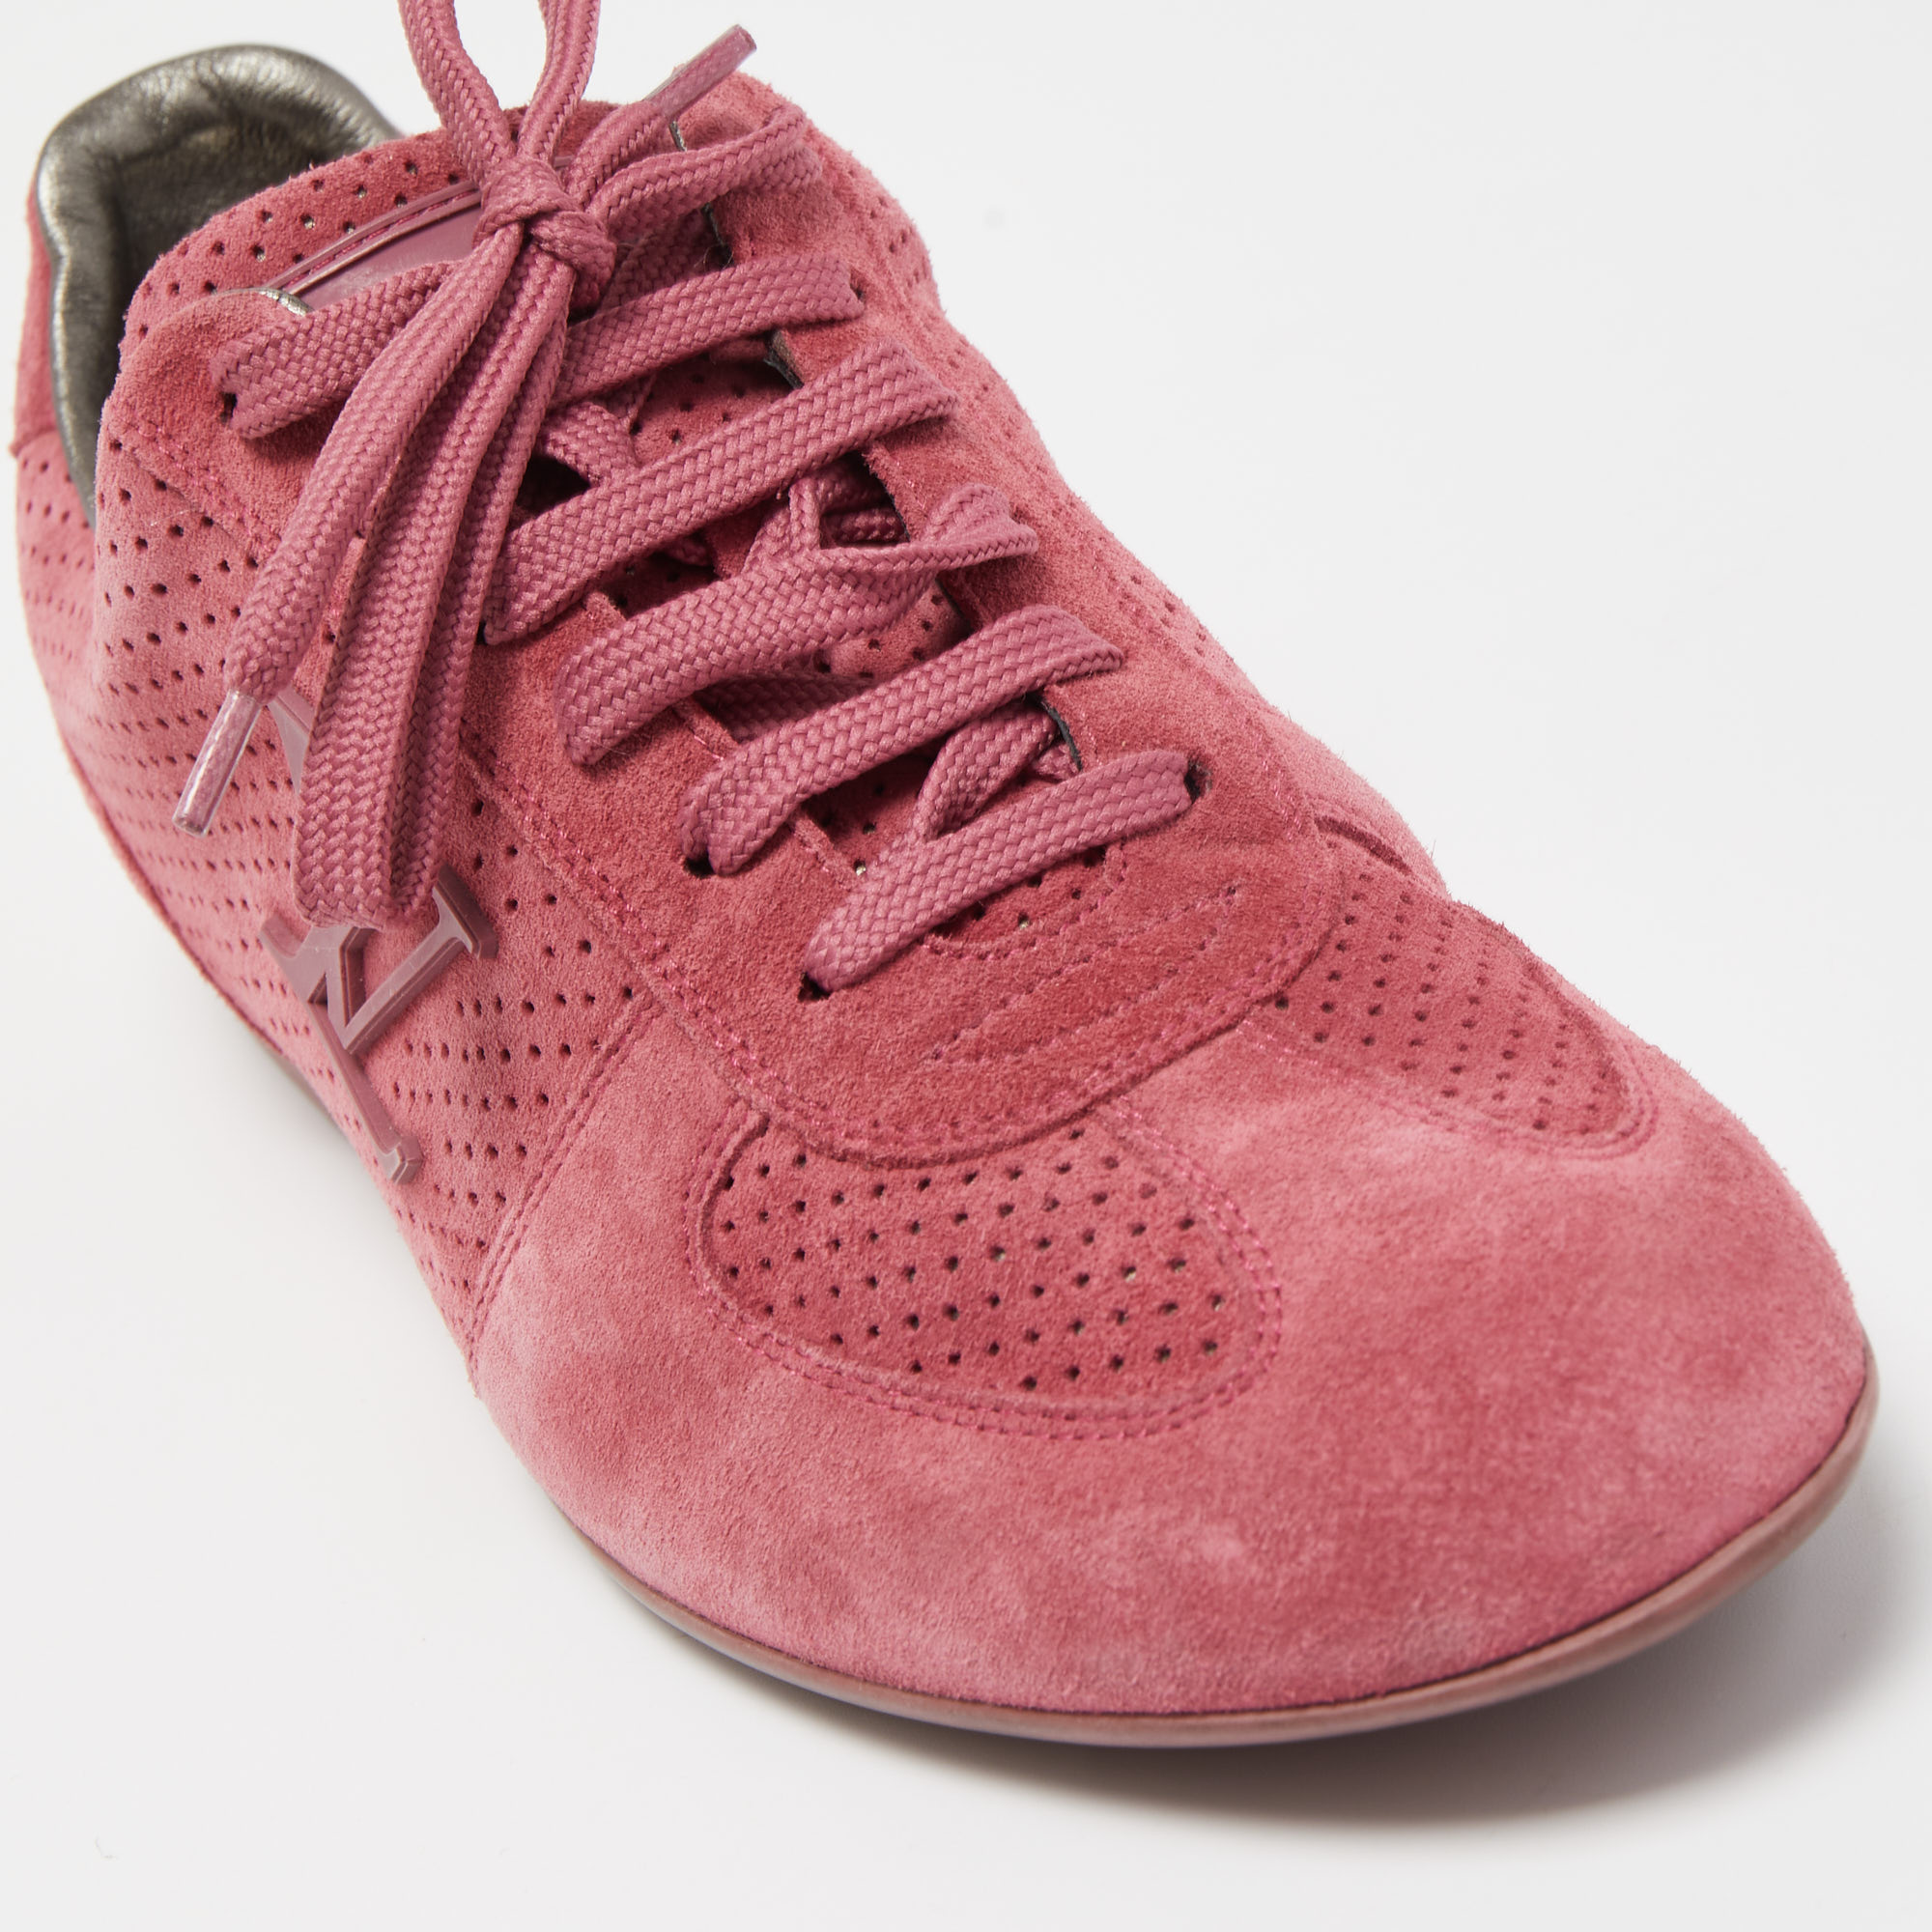 Louis Vuitton Pink Perforated Suede Low Top Sneakers Size 37.5